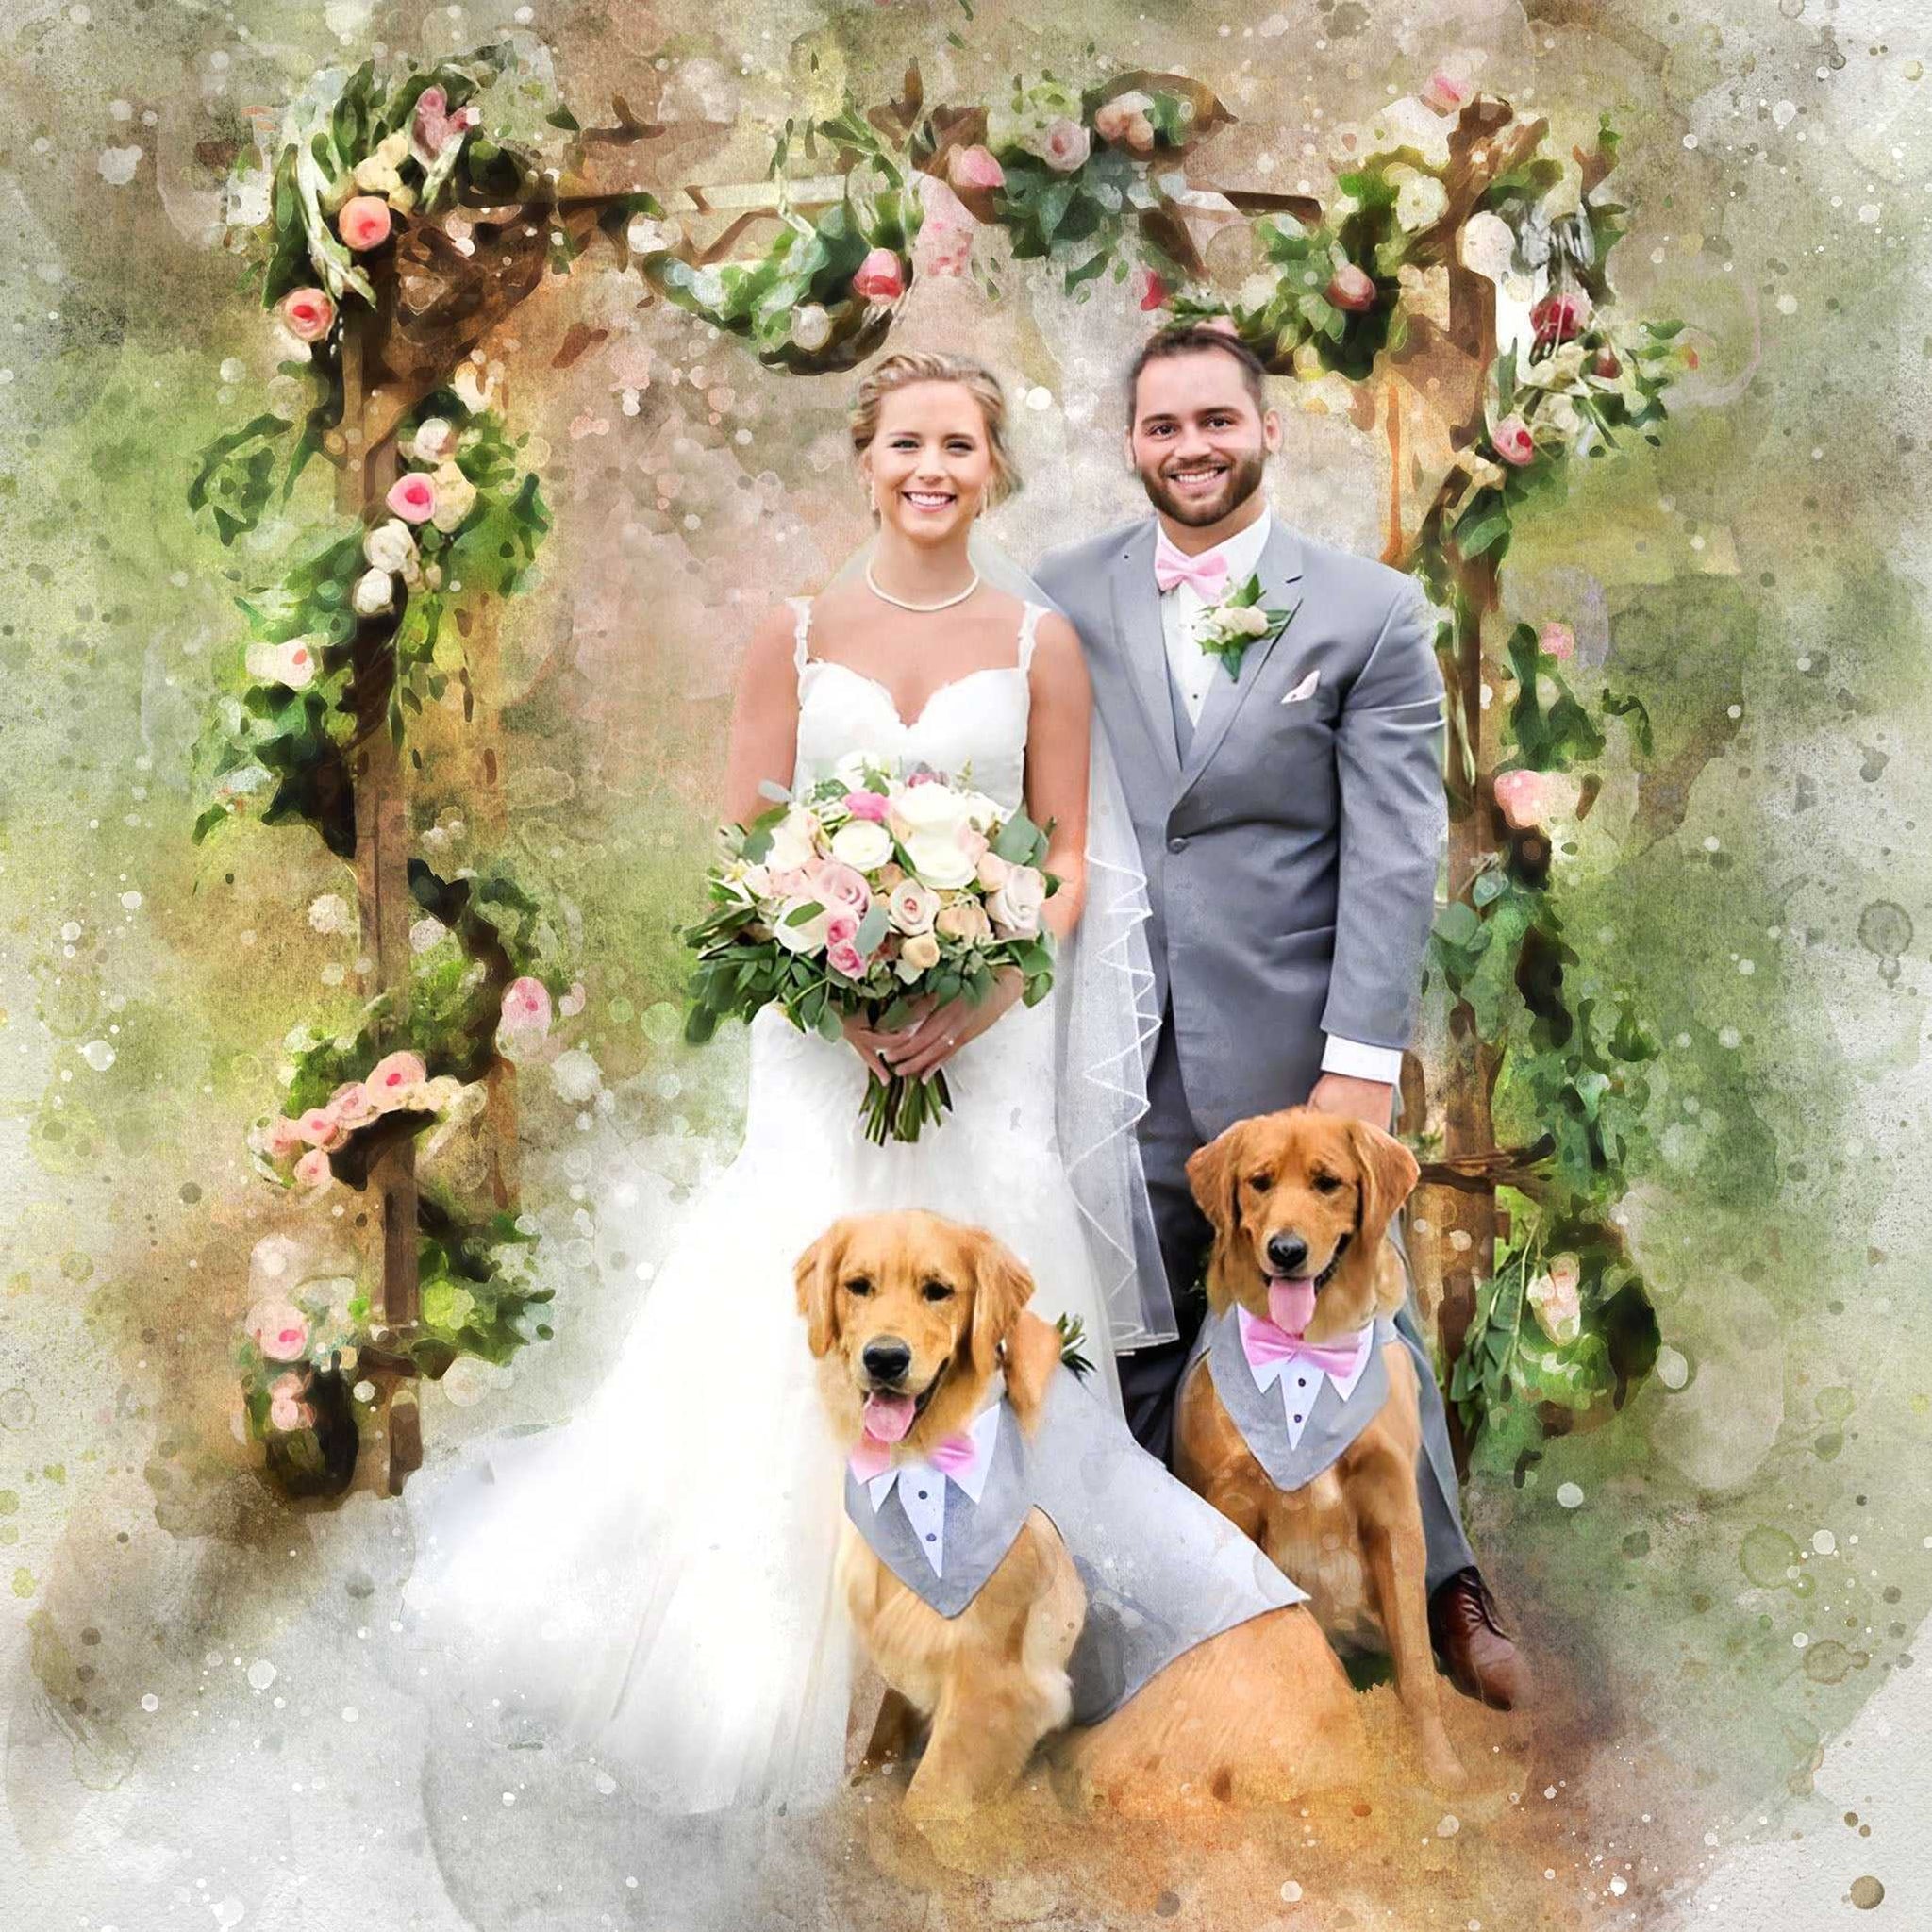 Unique Wedding Gifts for Couples | Custom Portrait Paintings | Pictures to Paint - FromPicToArt